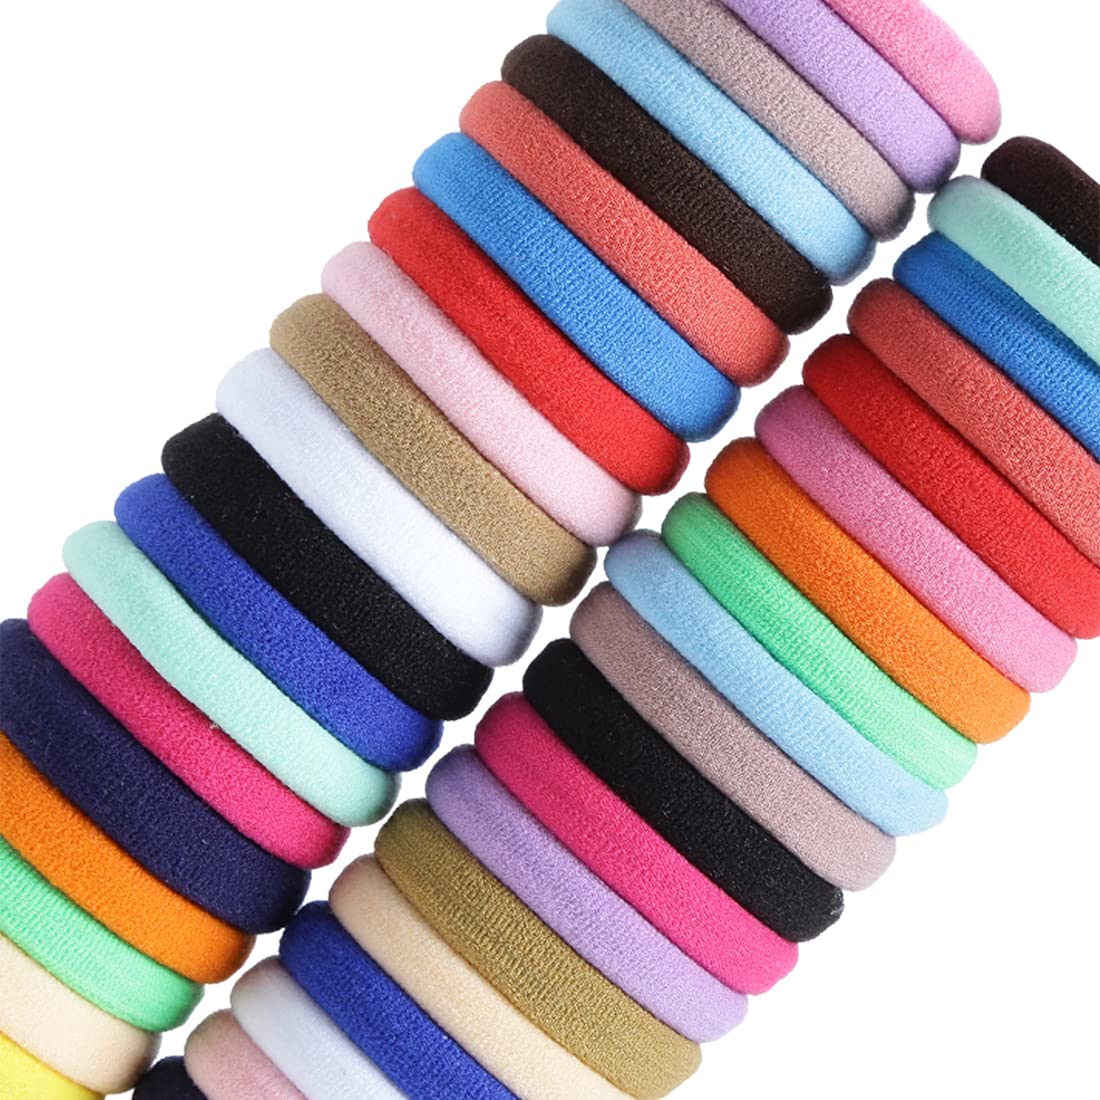 Melbees by Yellow Chimes Hair Rubber Bands for Girls Kids Hair Accessories for Girls Rubberbands Pony Holders 40 Pcs Multicolor Cute Small Ponytail Holders for Girls Kids Teens Toddlers